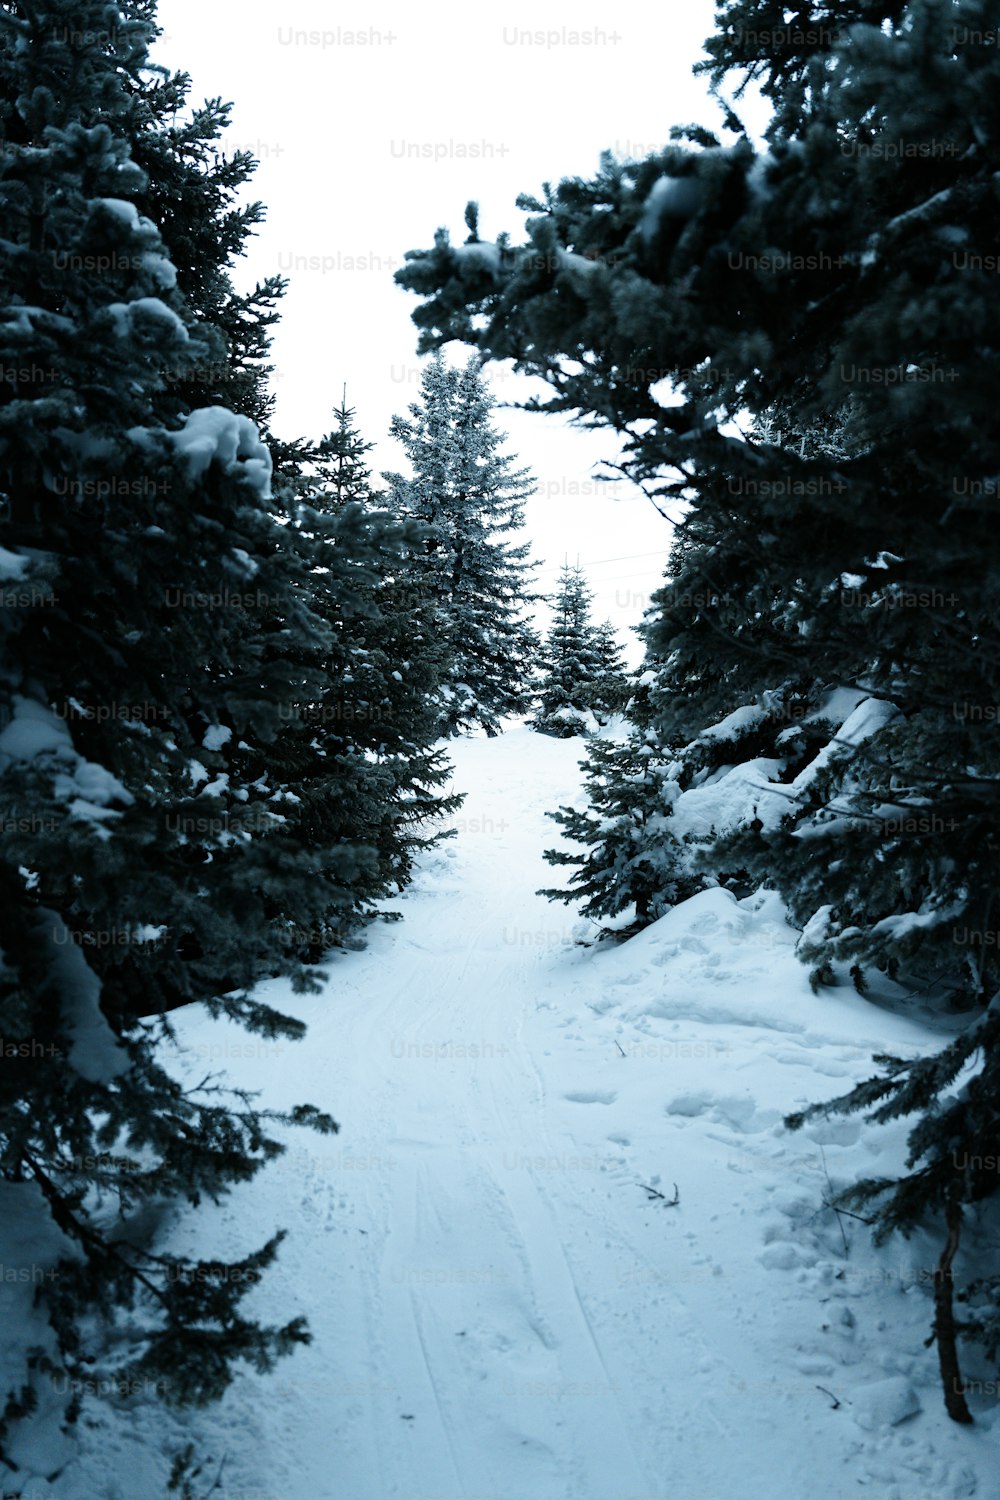 a person on skis going down a snowy path